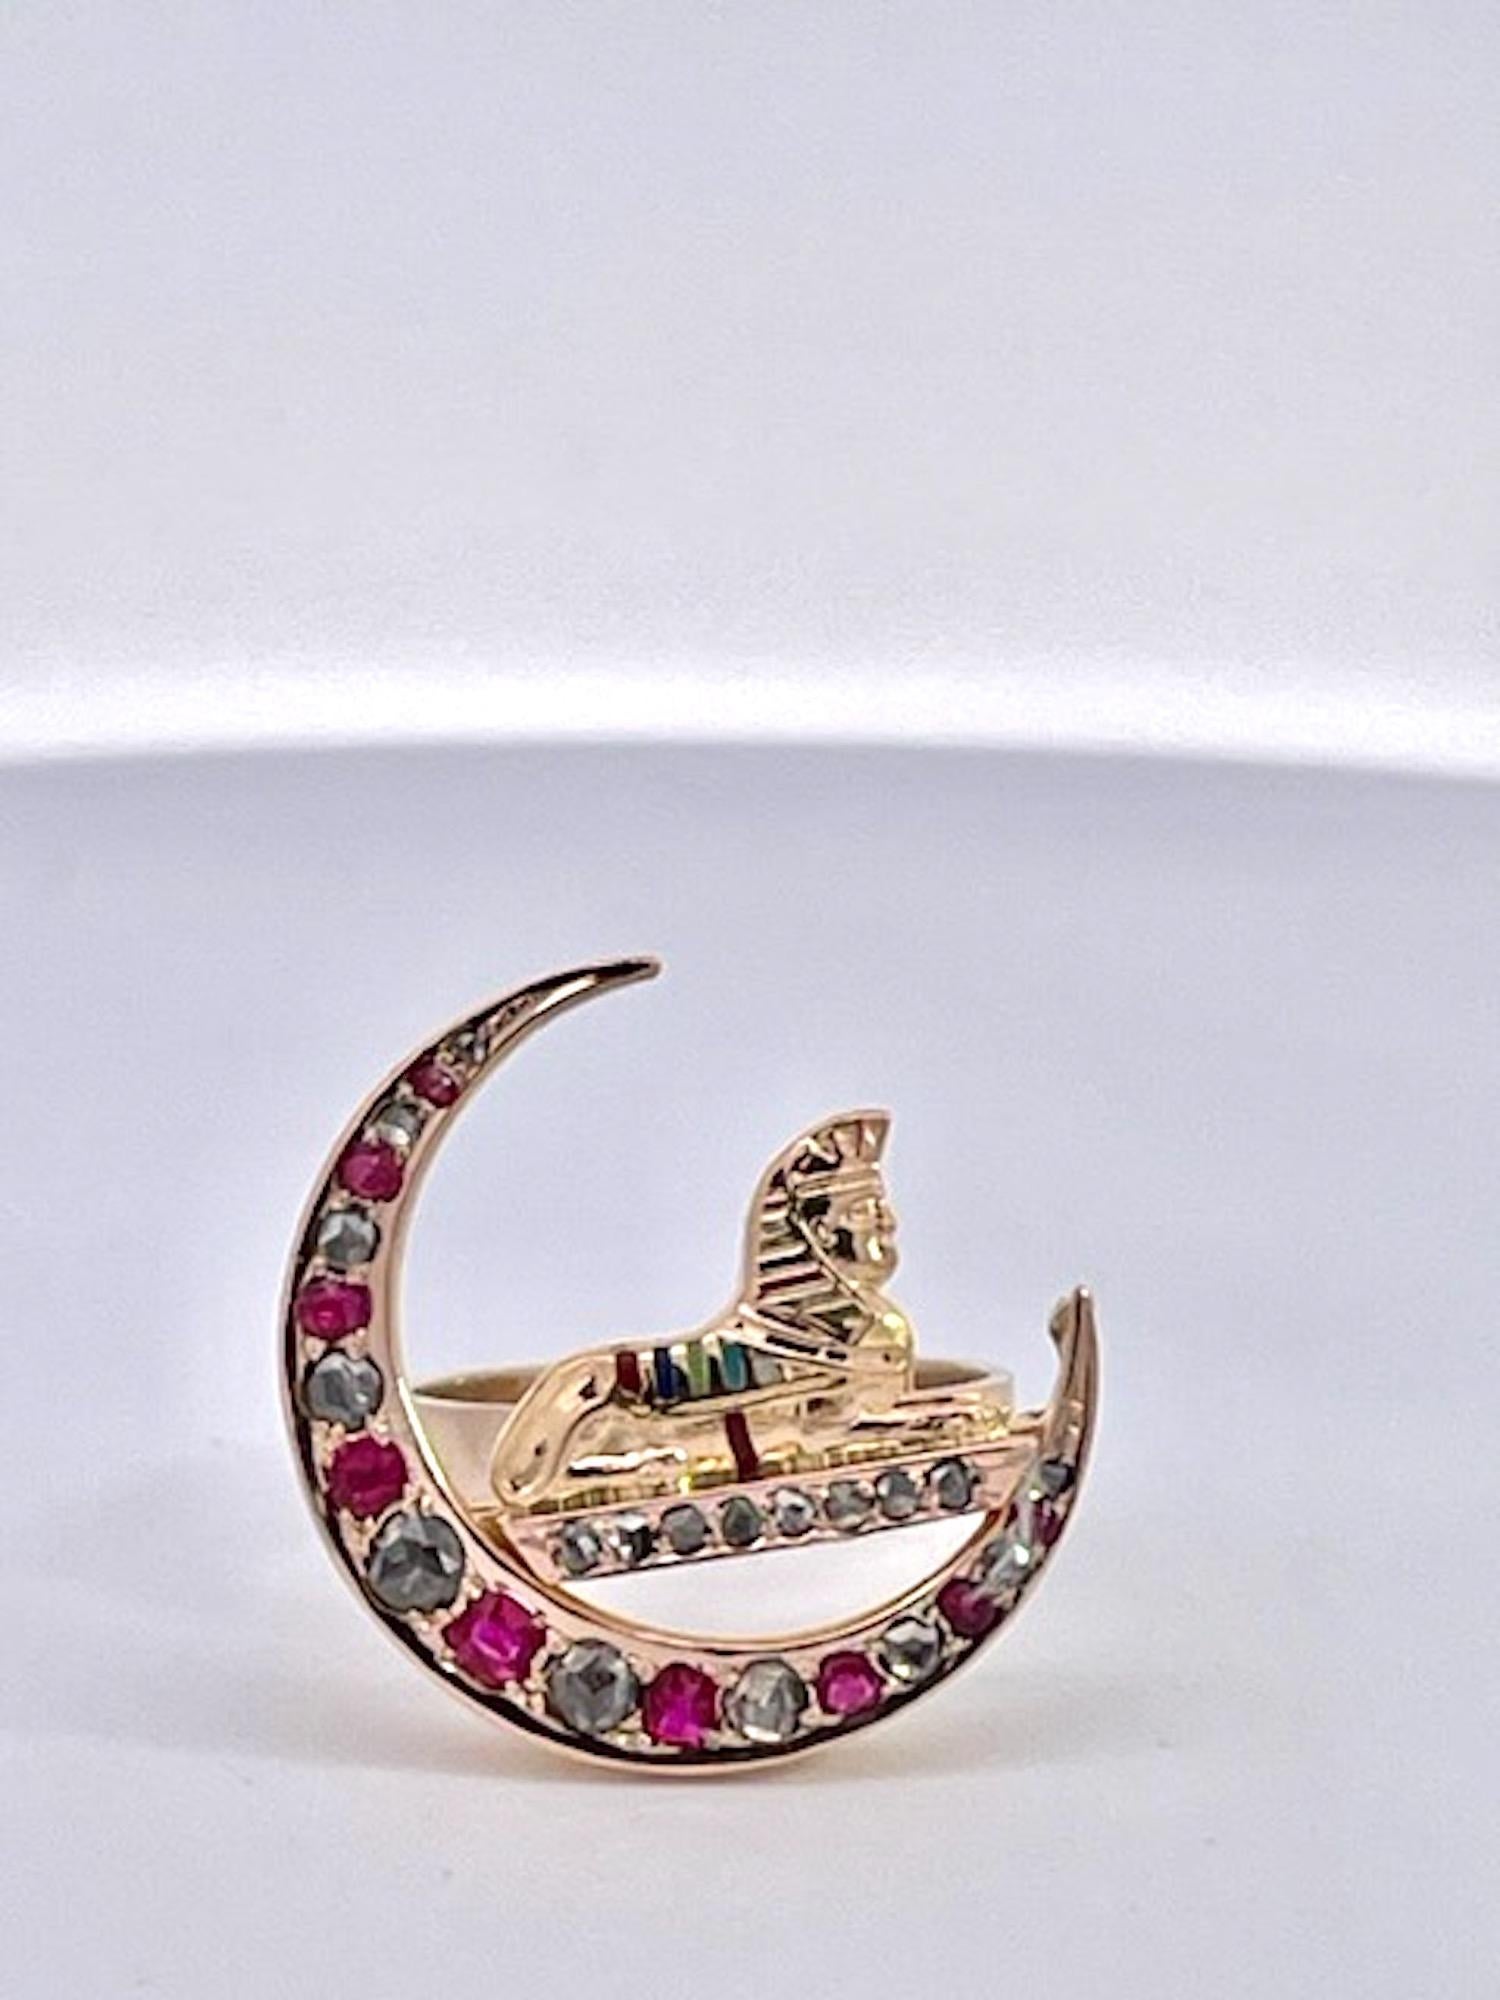 This antique Crescent ring with Enamel Sphinx  is true Egyptian style circa 1900.  This ring is set with Rubies and rose cut Diamonds, with a bit of enamel on the sphinx itself.  This ring is 14K Yellow Gold and weighs in at 4.31 grams.  It measures